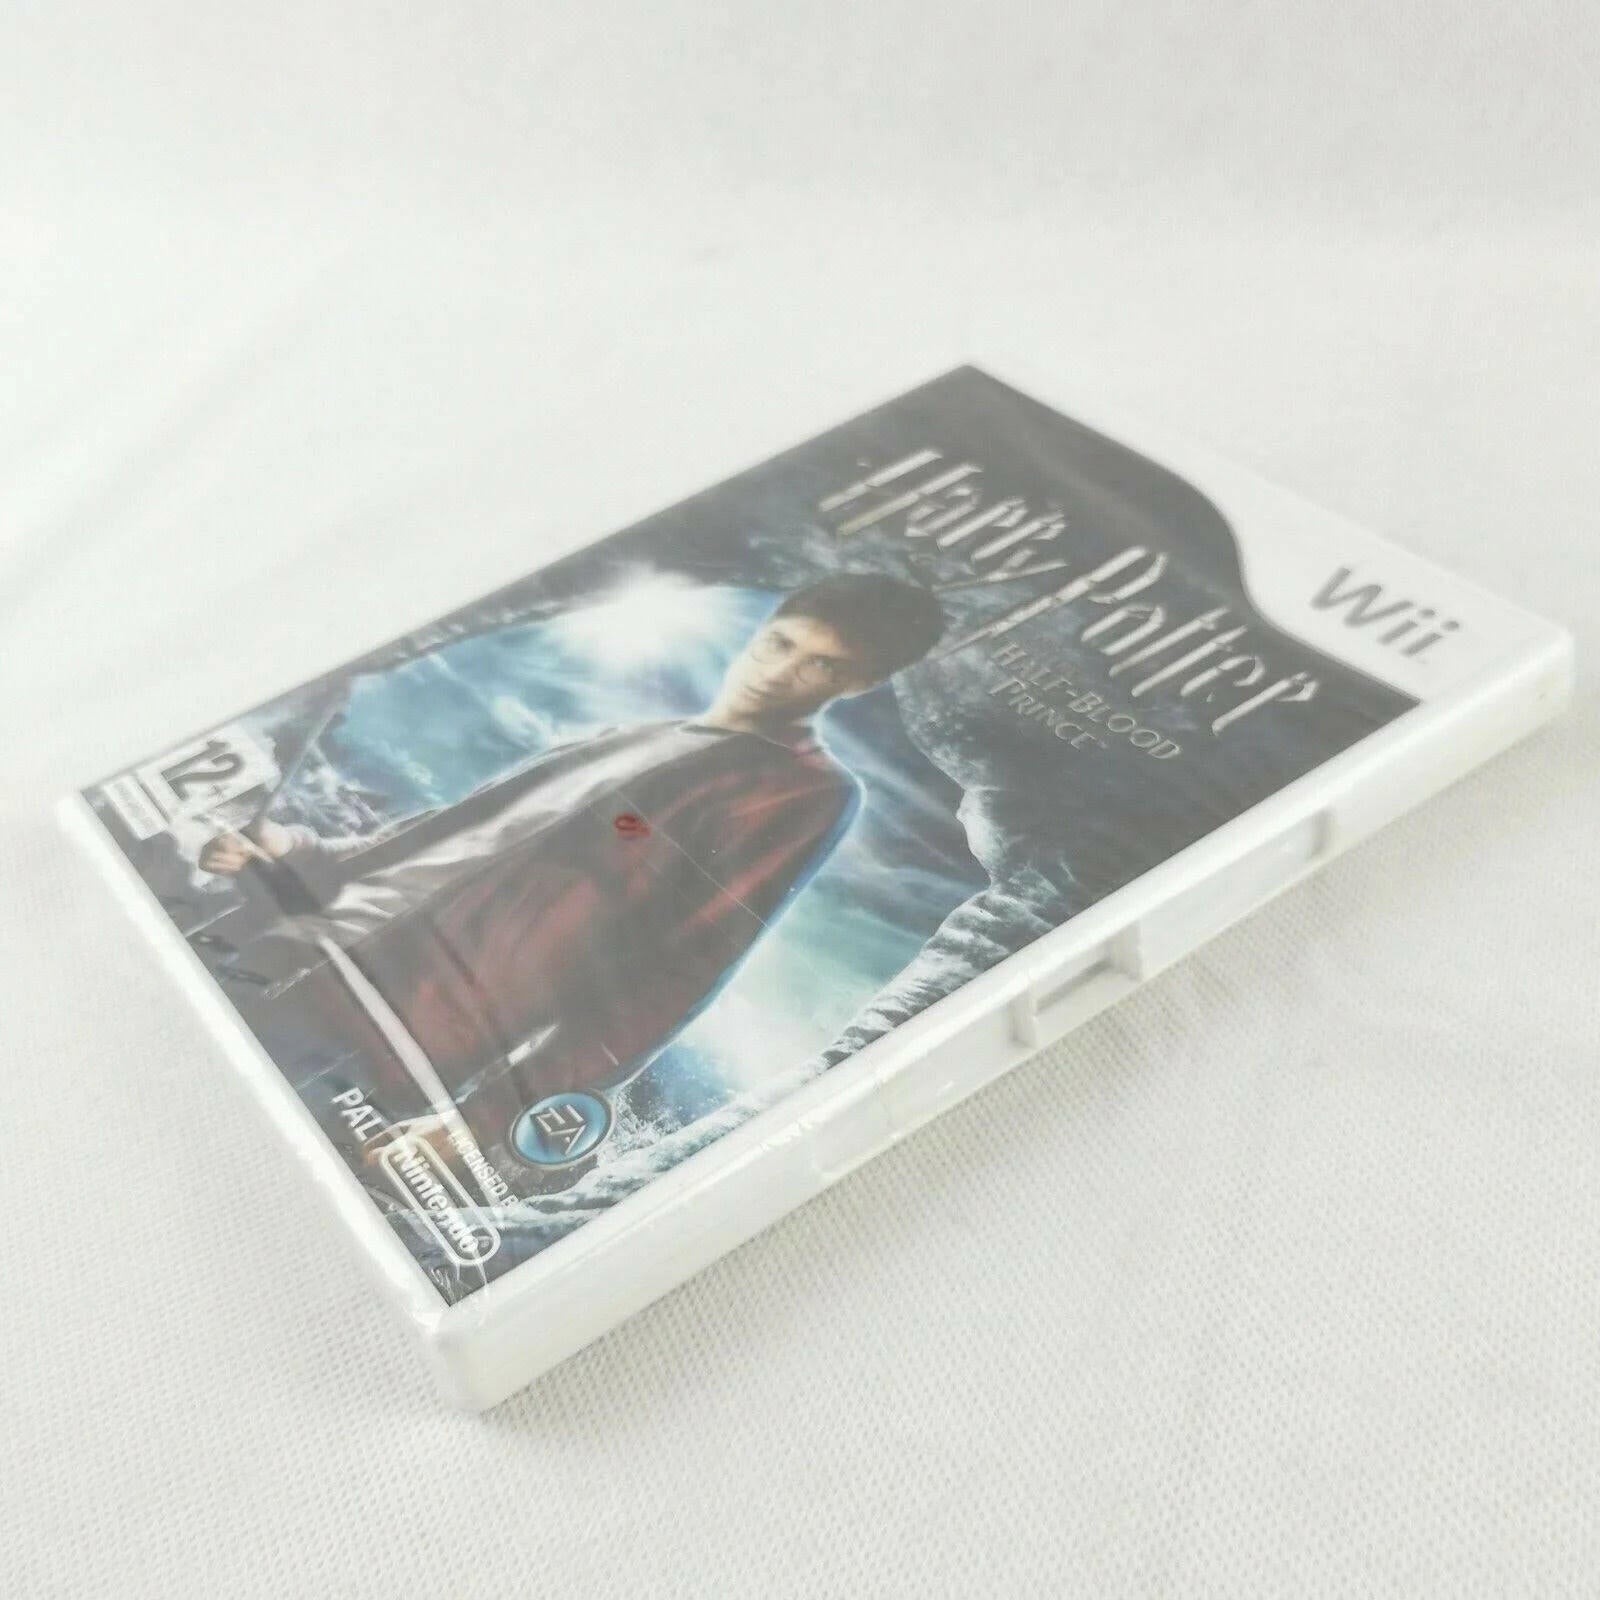 Harry Potter and The HALF-BLOOD Prince Wii